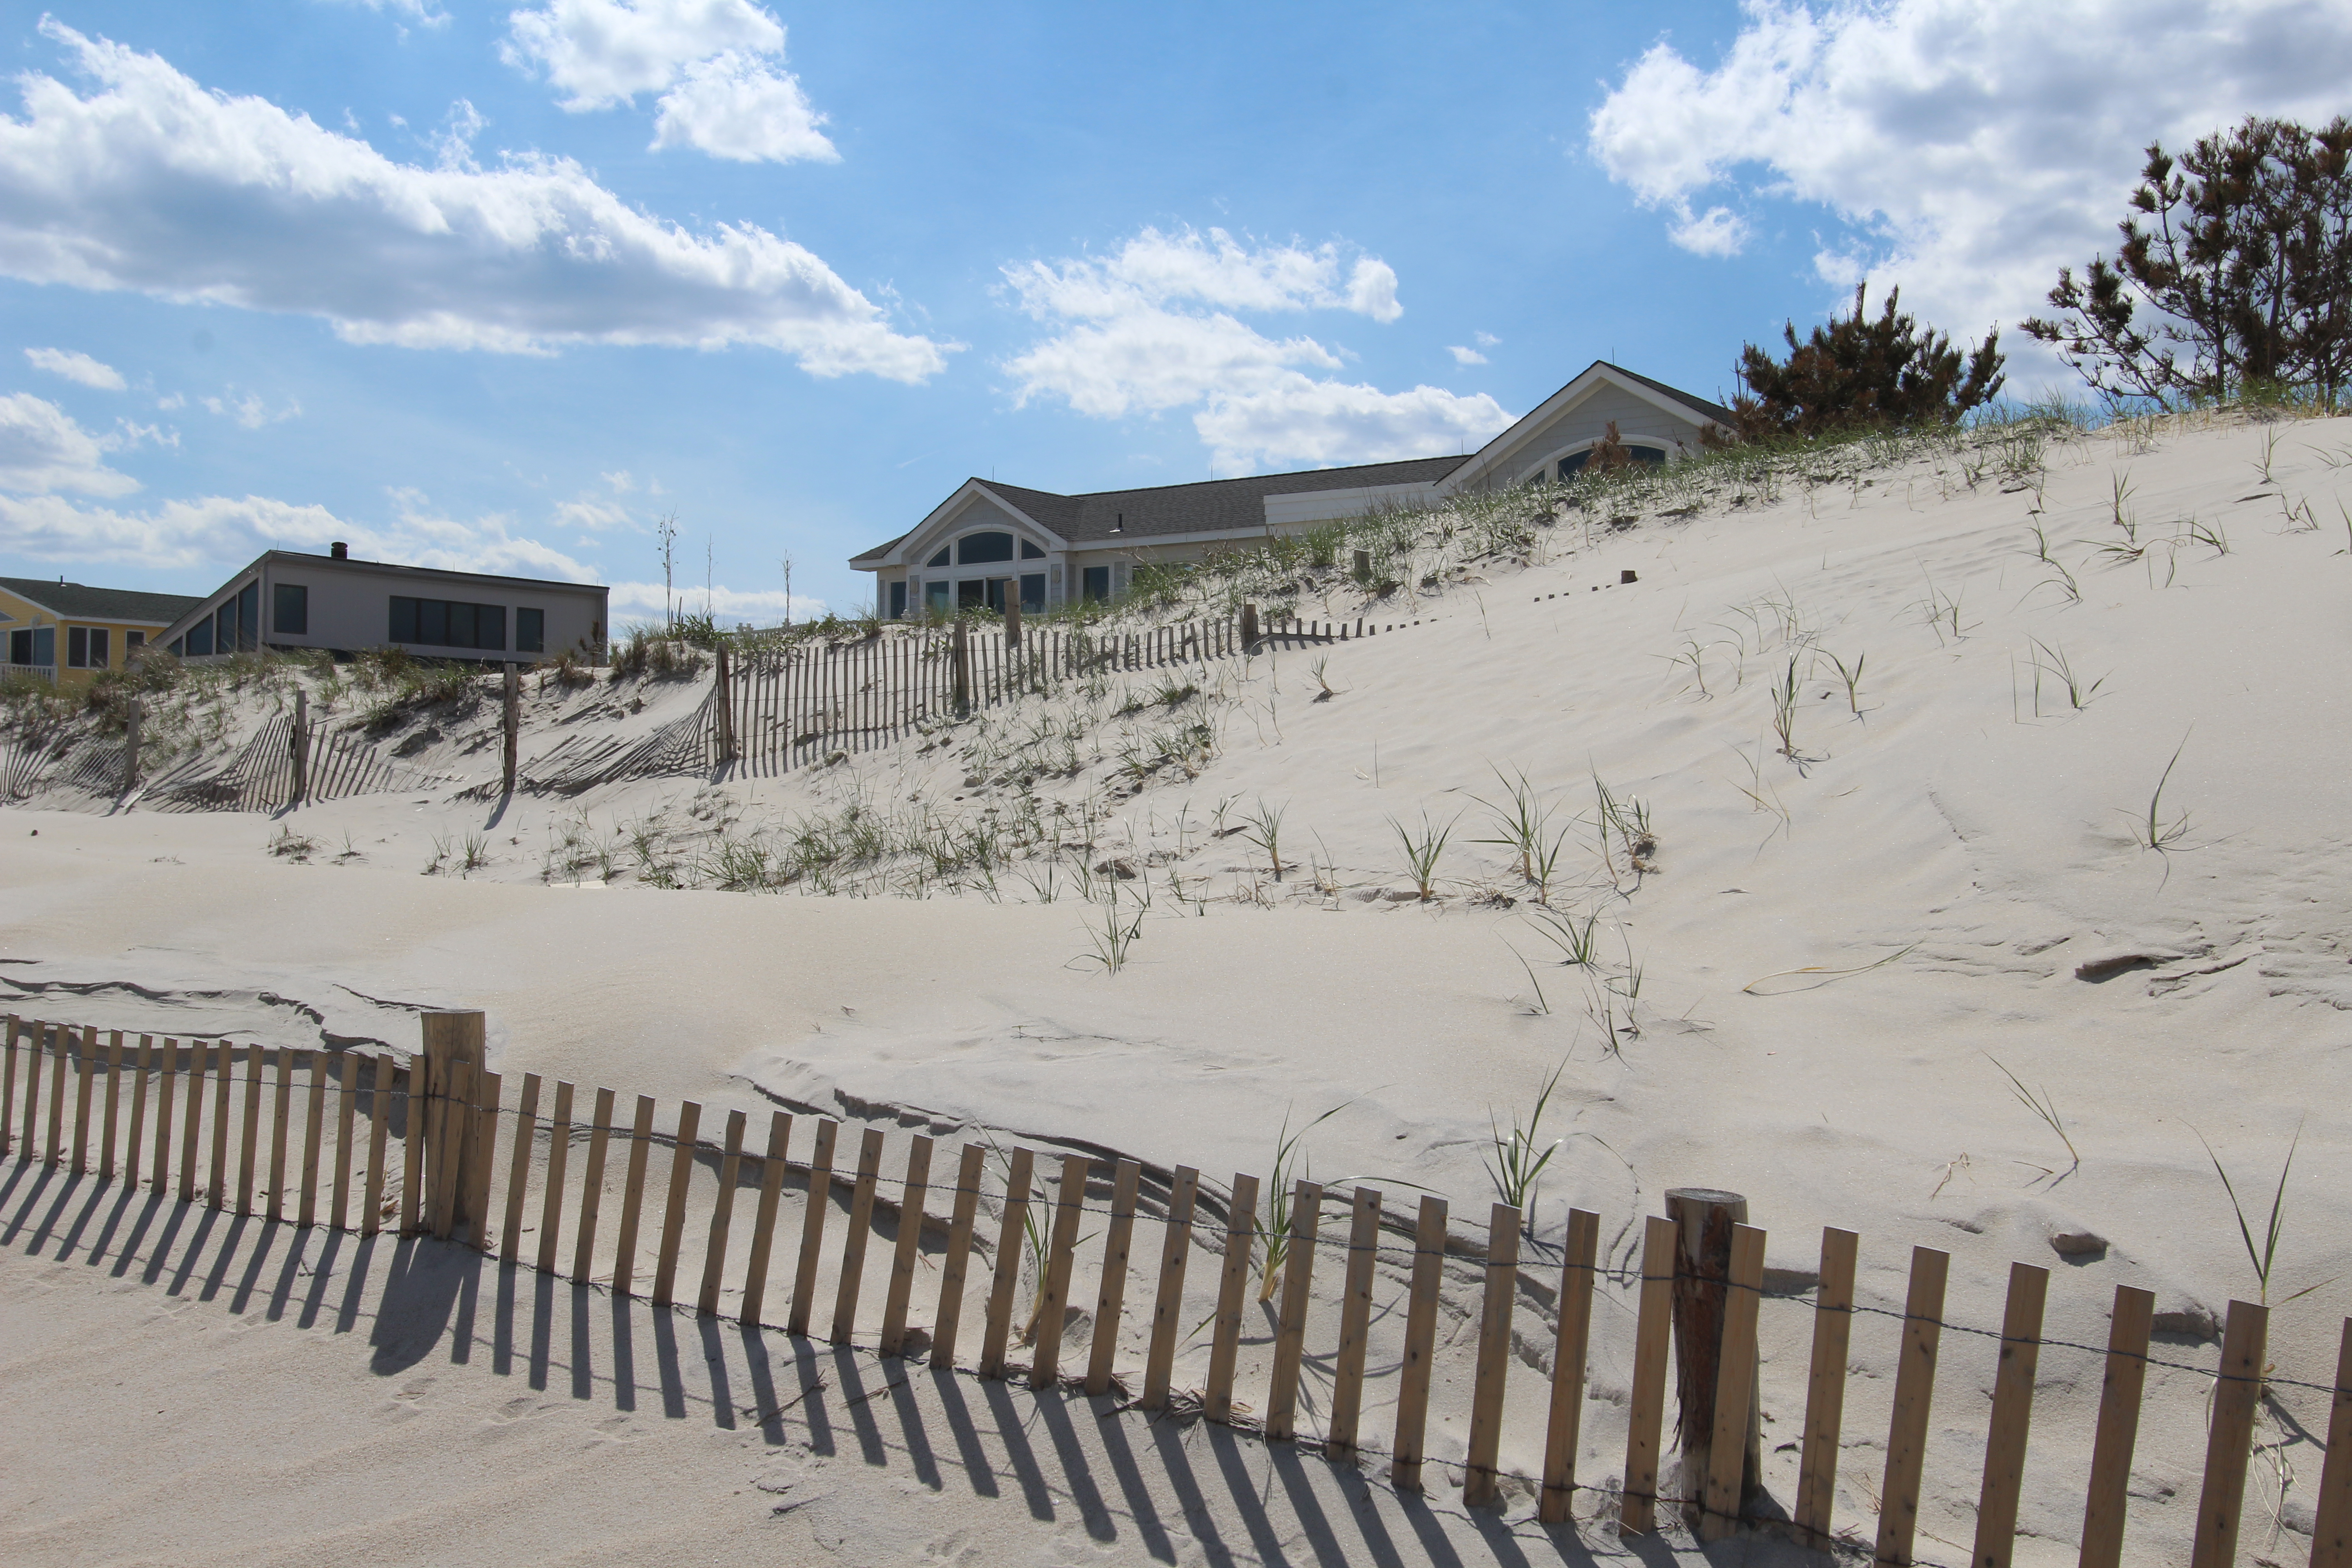 How to Stay Qualified When Shopping for a Home in the LBI Real Estate Market